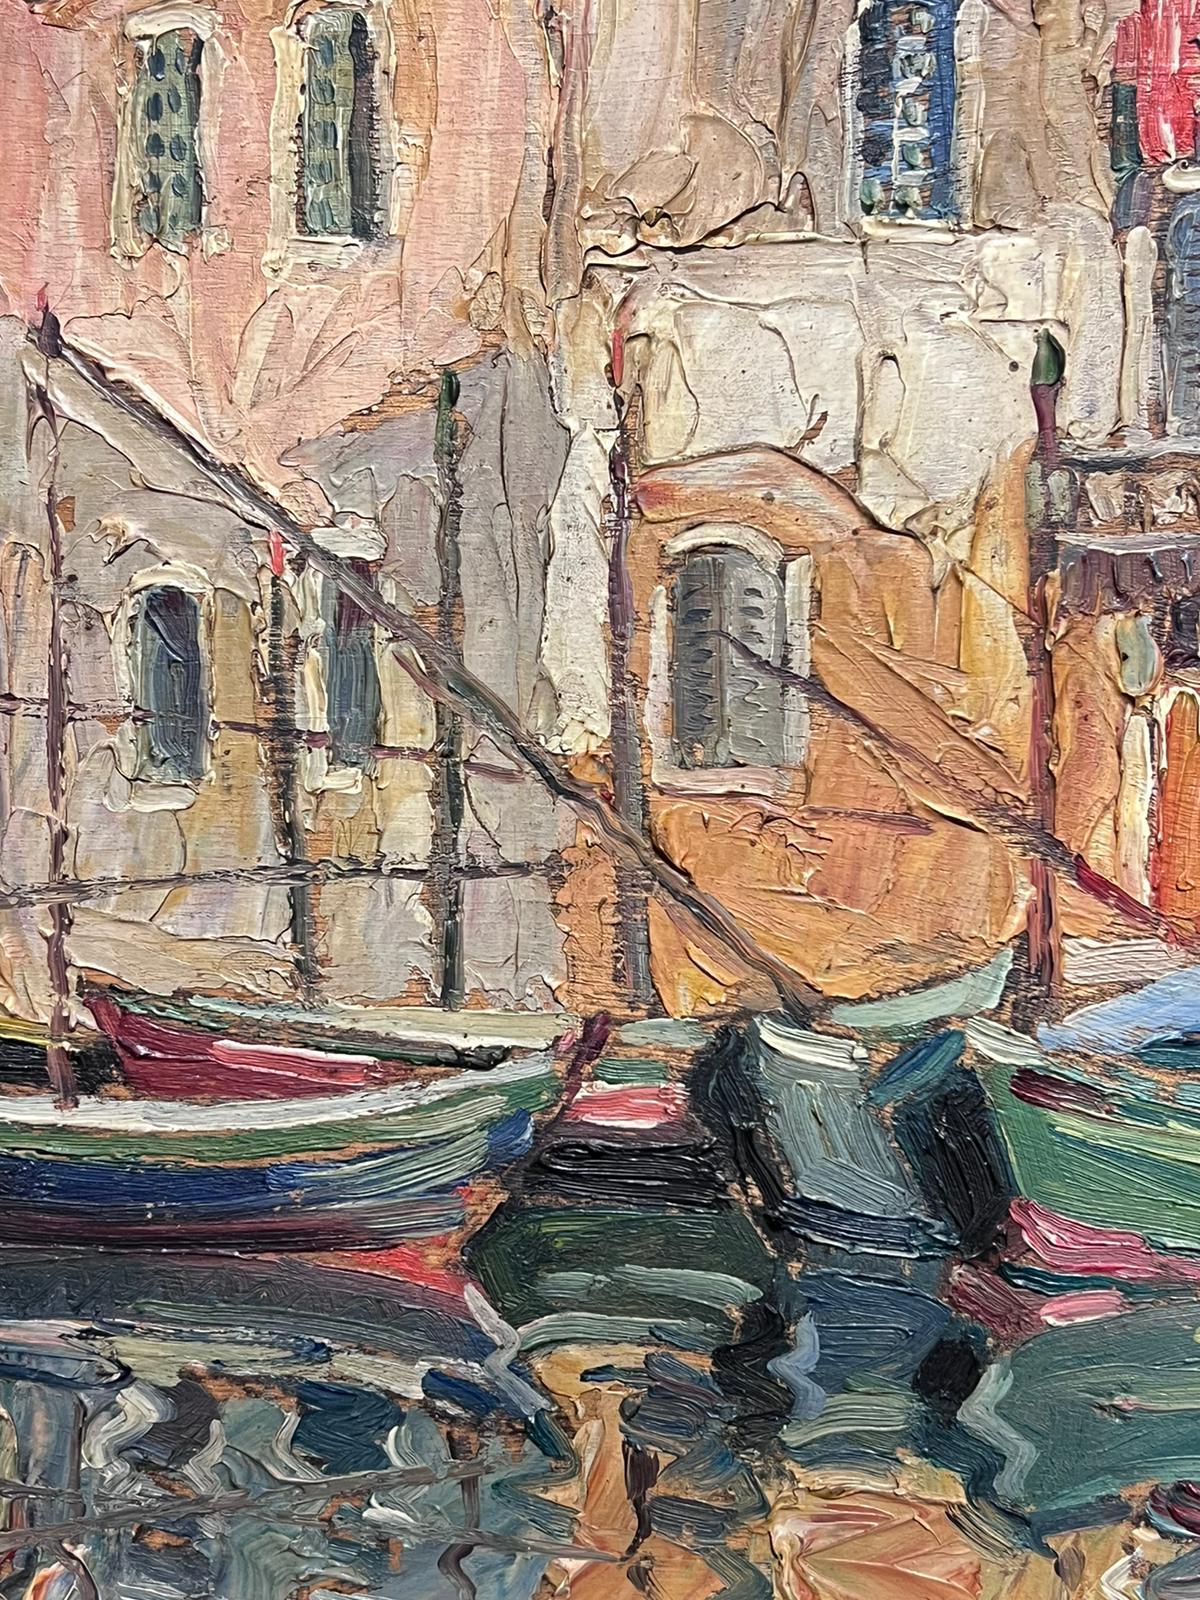 St Tropez Harbor Boats Moored Sleep Sunny French Old Town 1950's Impressionist For Sale 1